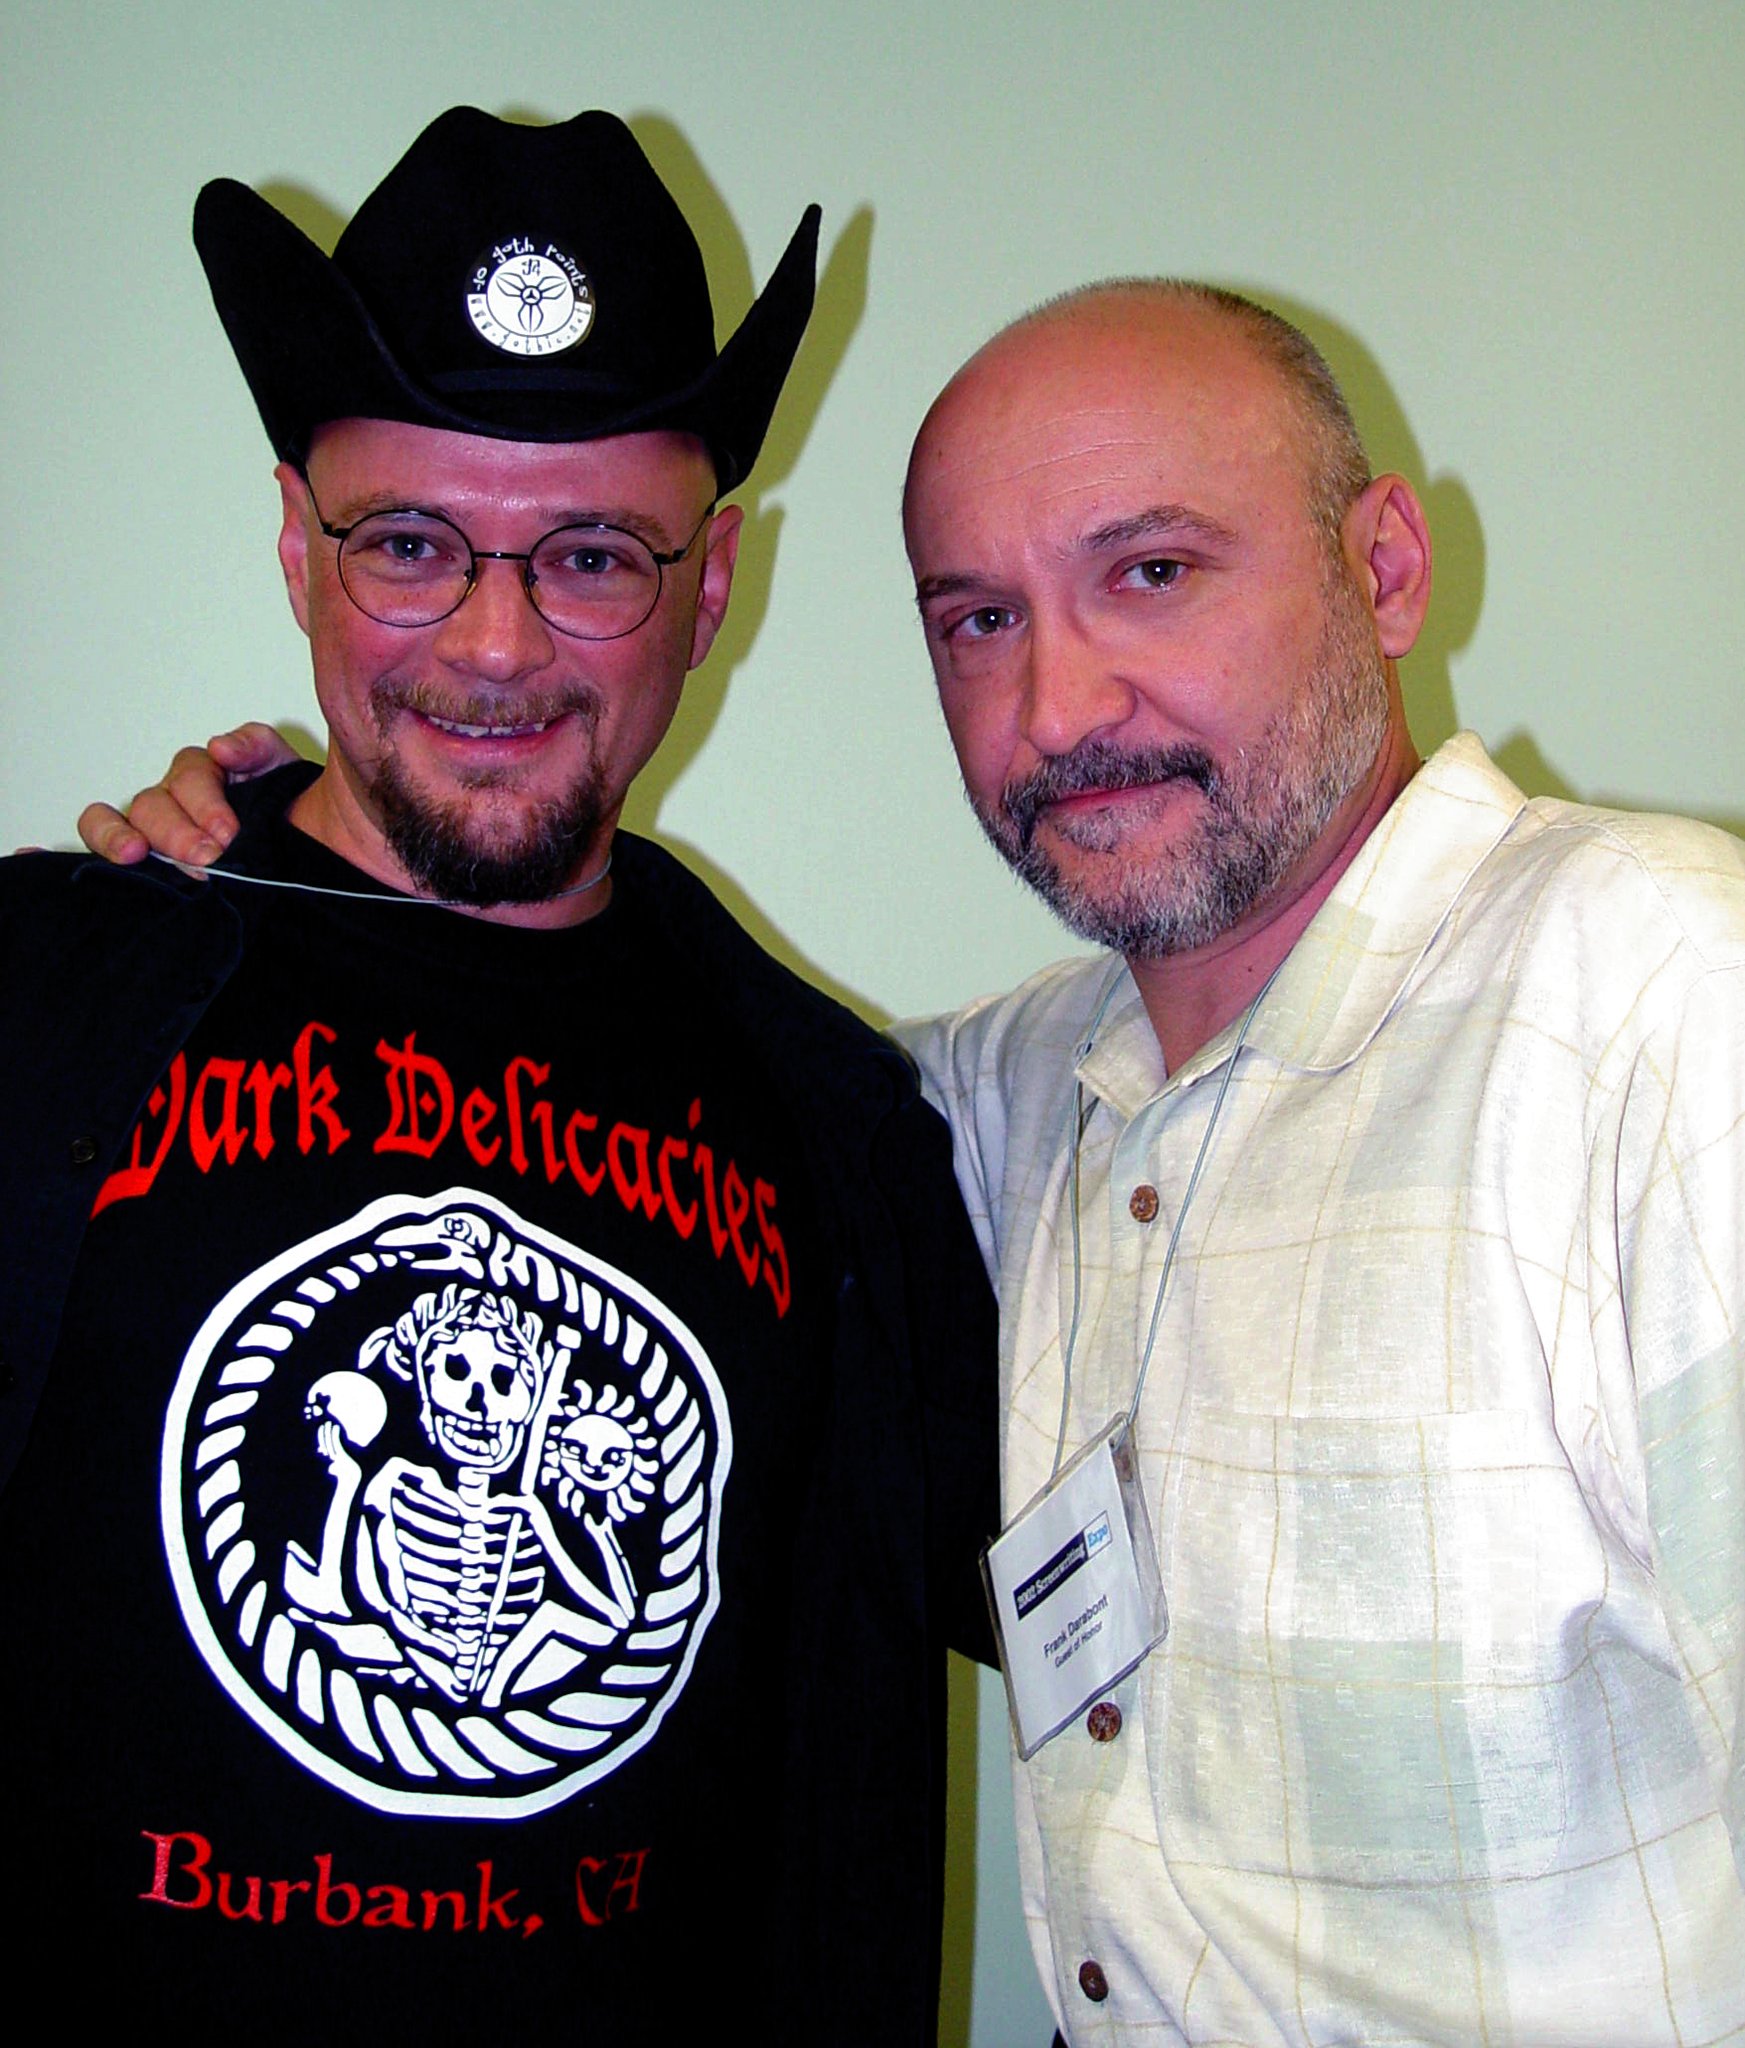 HAPPY BIRTHDAY Frank Darabont!
I learned today that you are only 3 years older than me! 